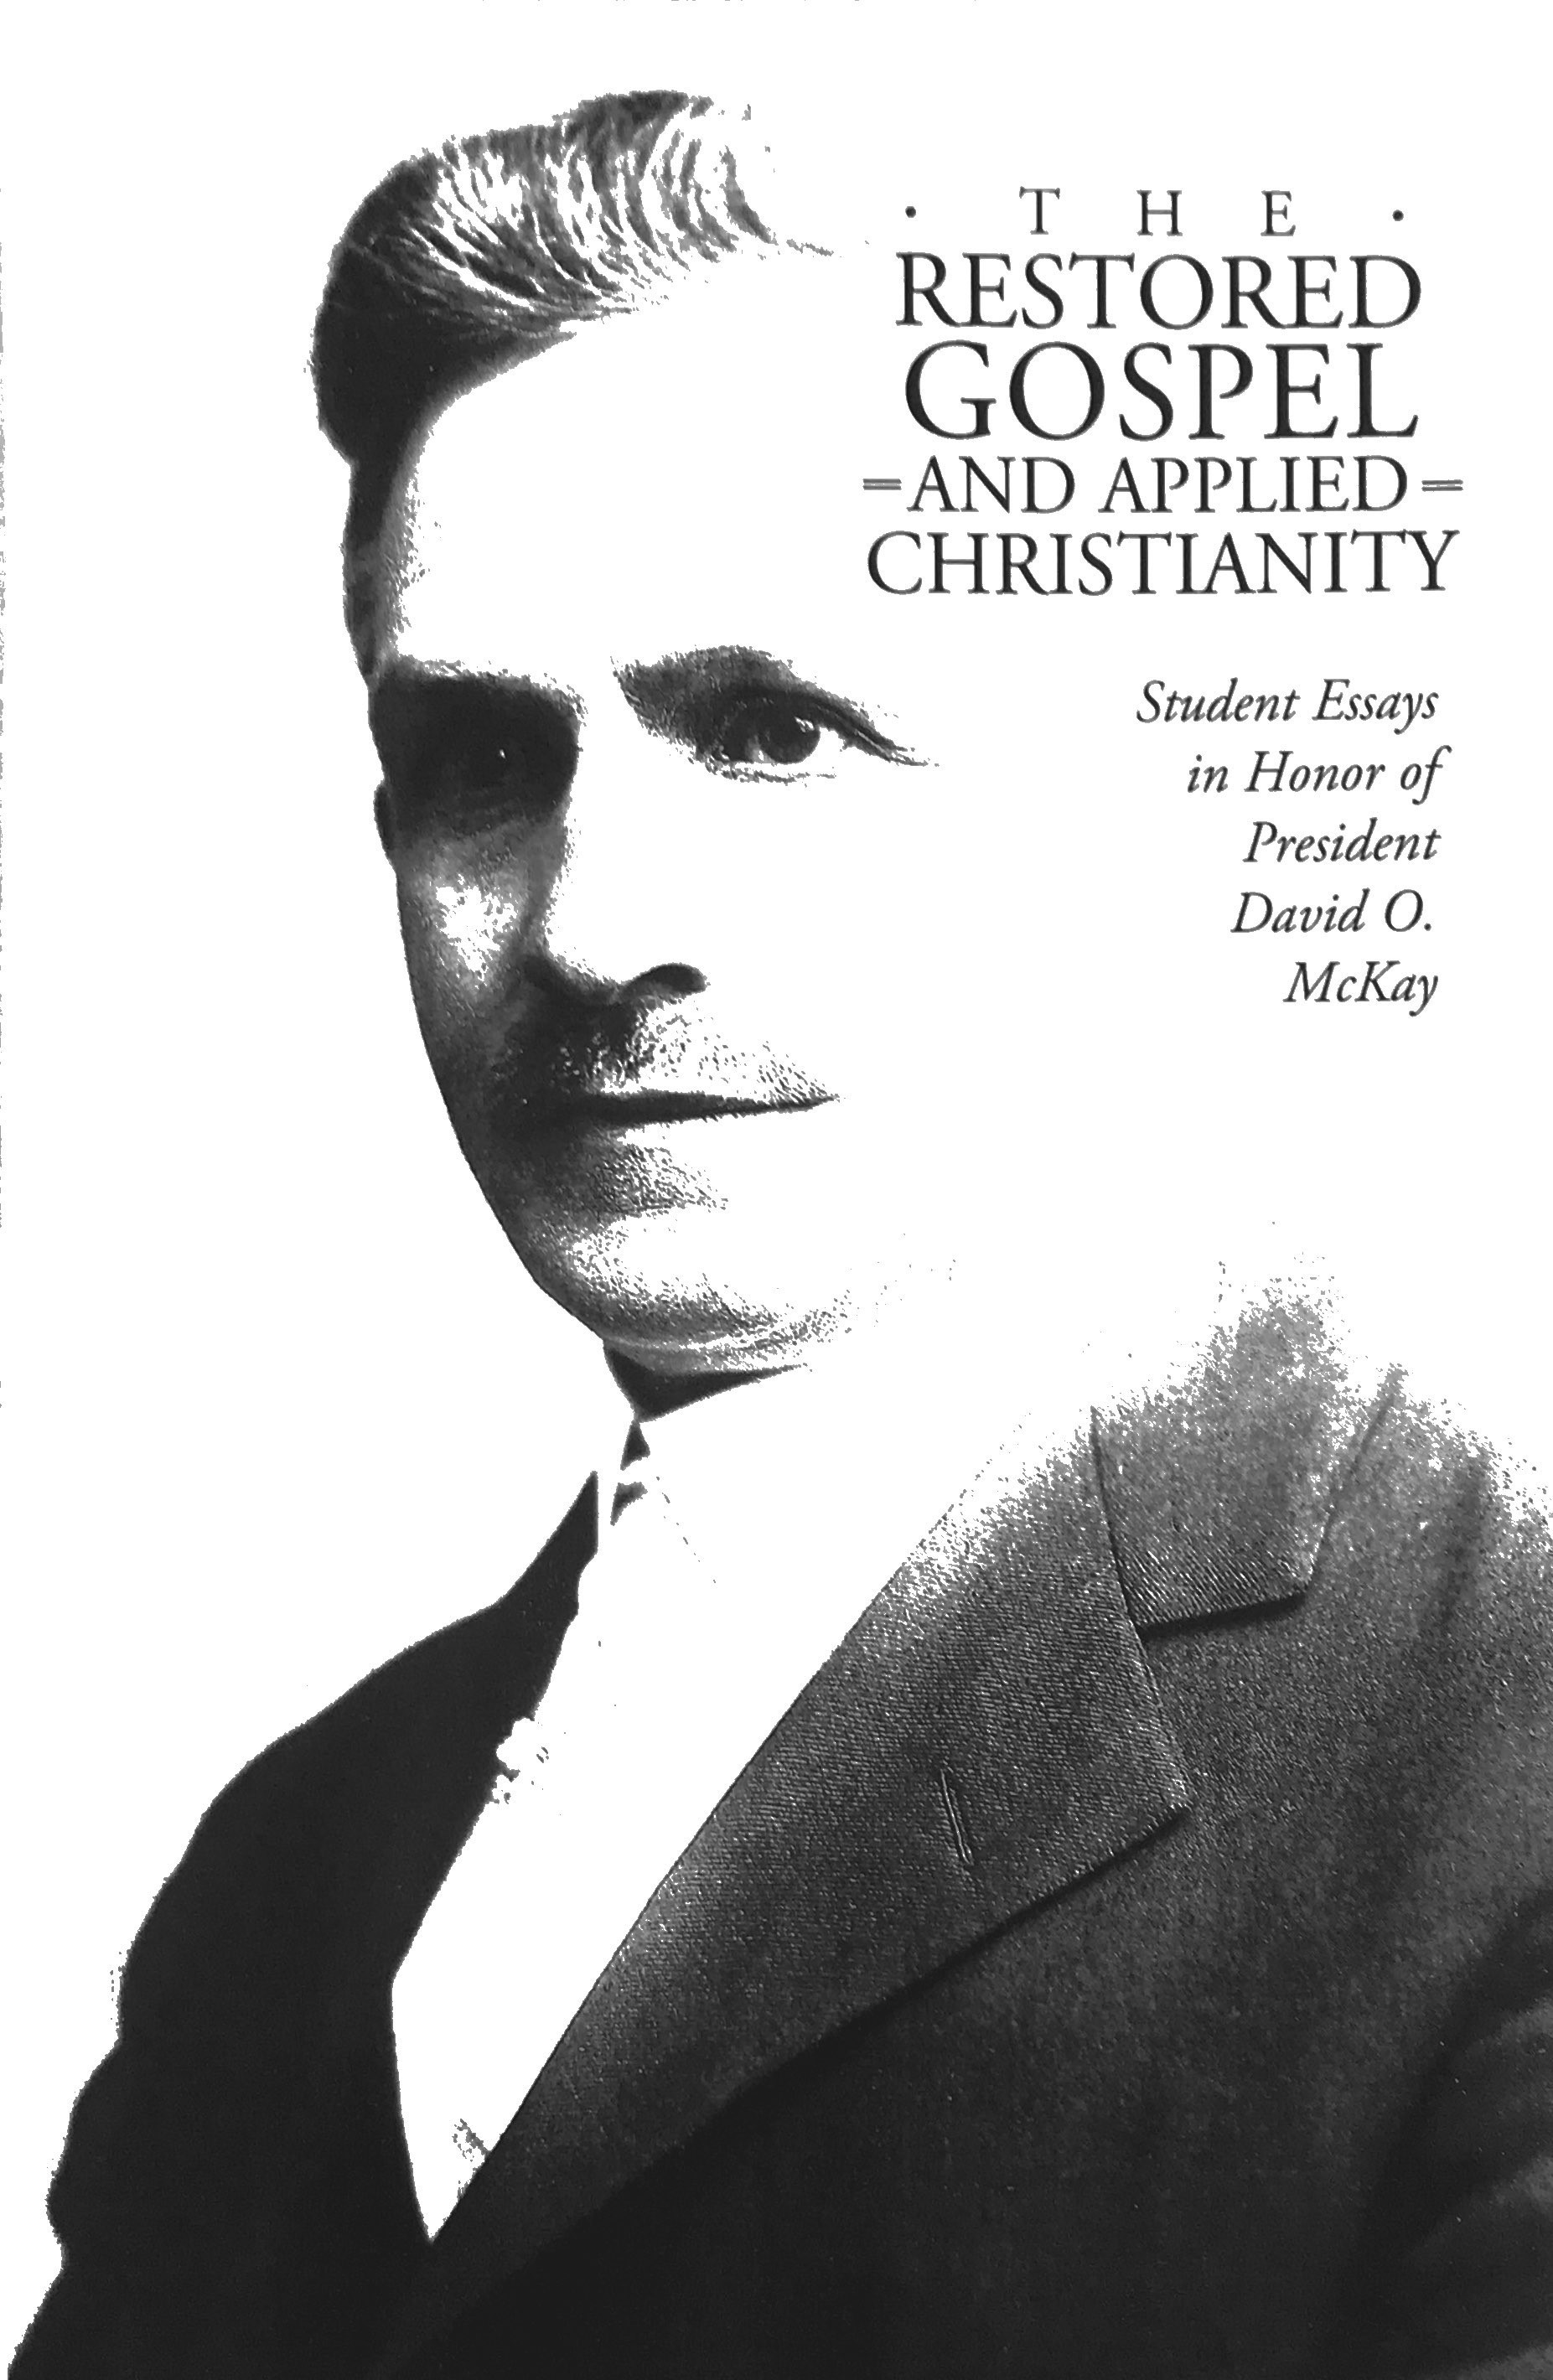 The Restored Gospel and Applied Christianity: Student Essays in Honor of President David O. McKay